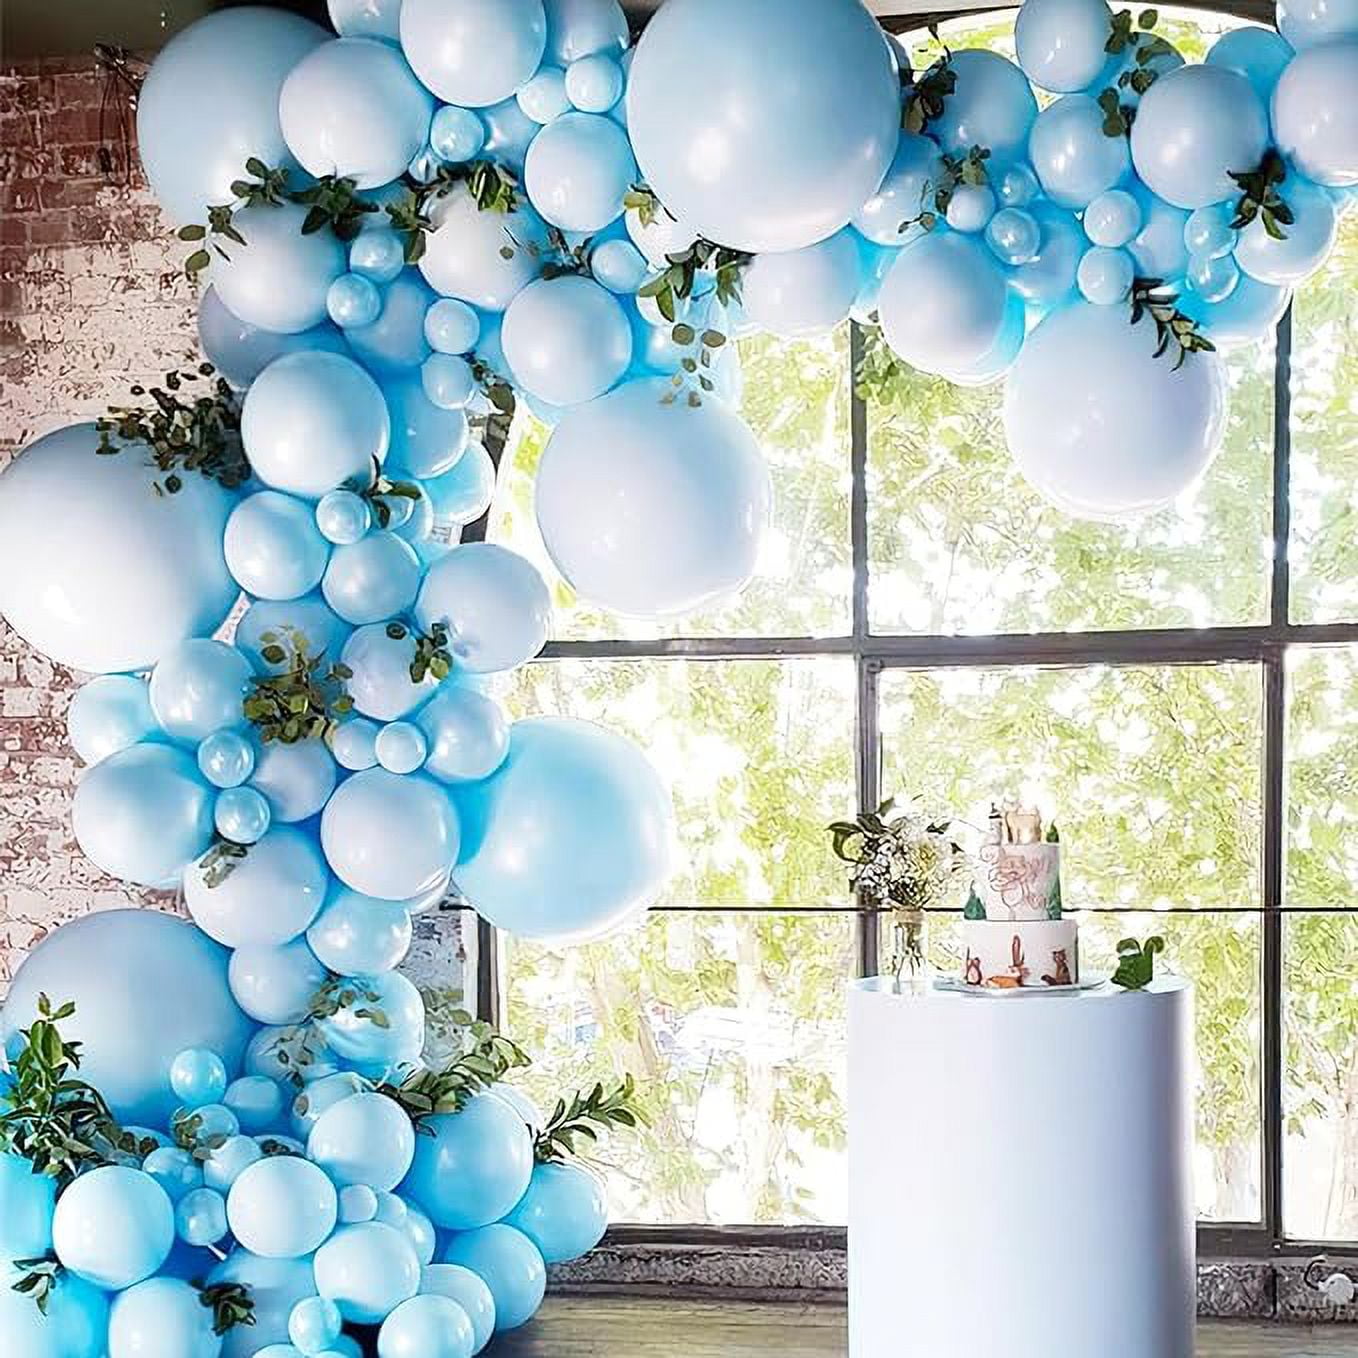 PartyWoo Dusty Blue Balloons, 100 pcs 12 Inch Boho Blue Balloons, Slate  Blue Balloons for Balloon Garland or Balloon Arch as Party Decorations,  Birthday Decorations, Baby Shower Decorations, Blue-F16 